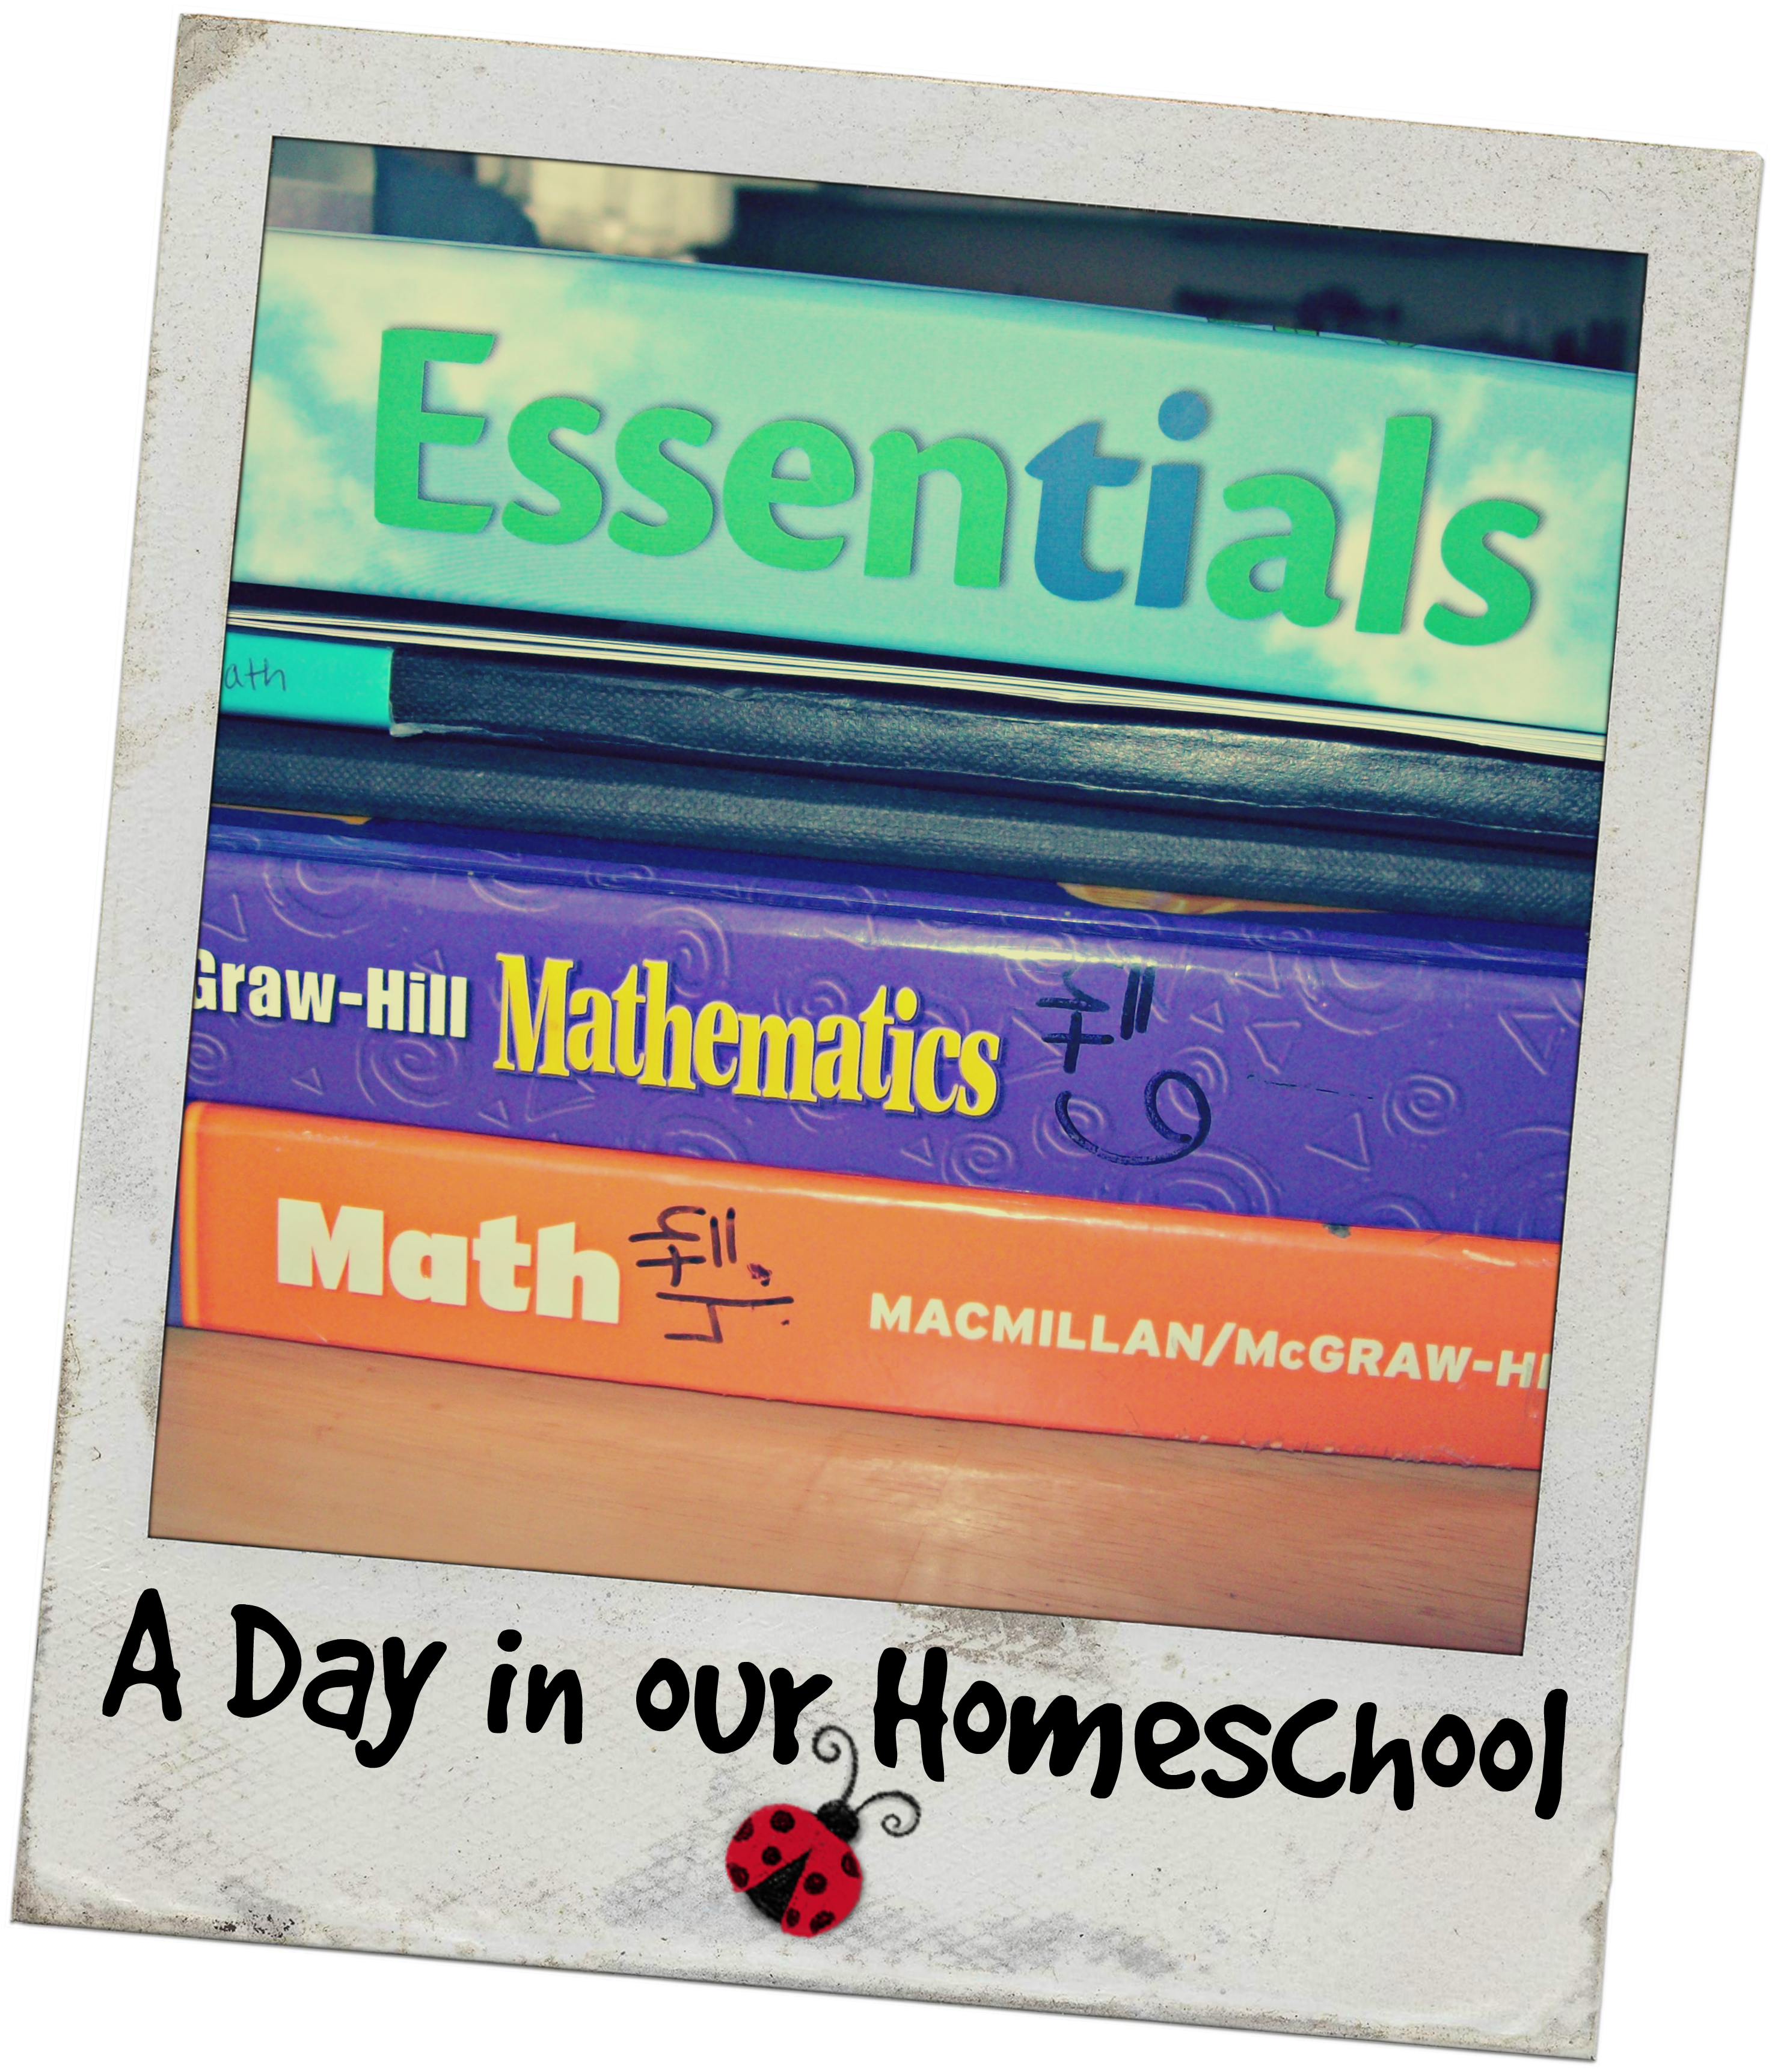 A Day in our Homeschool